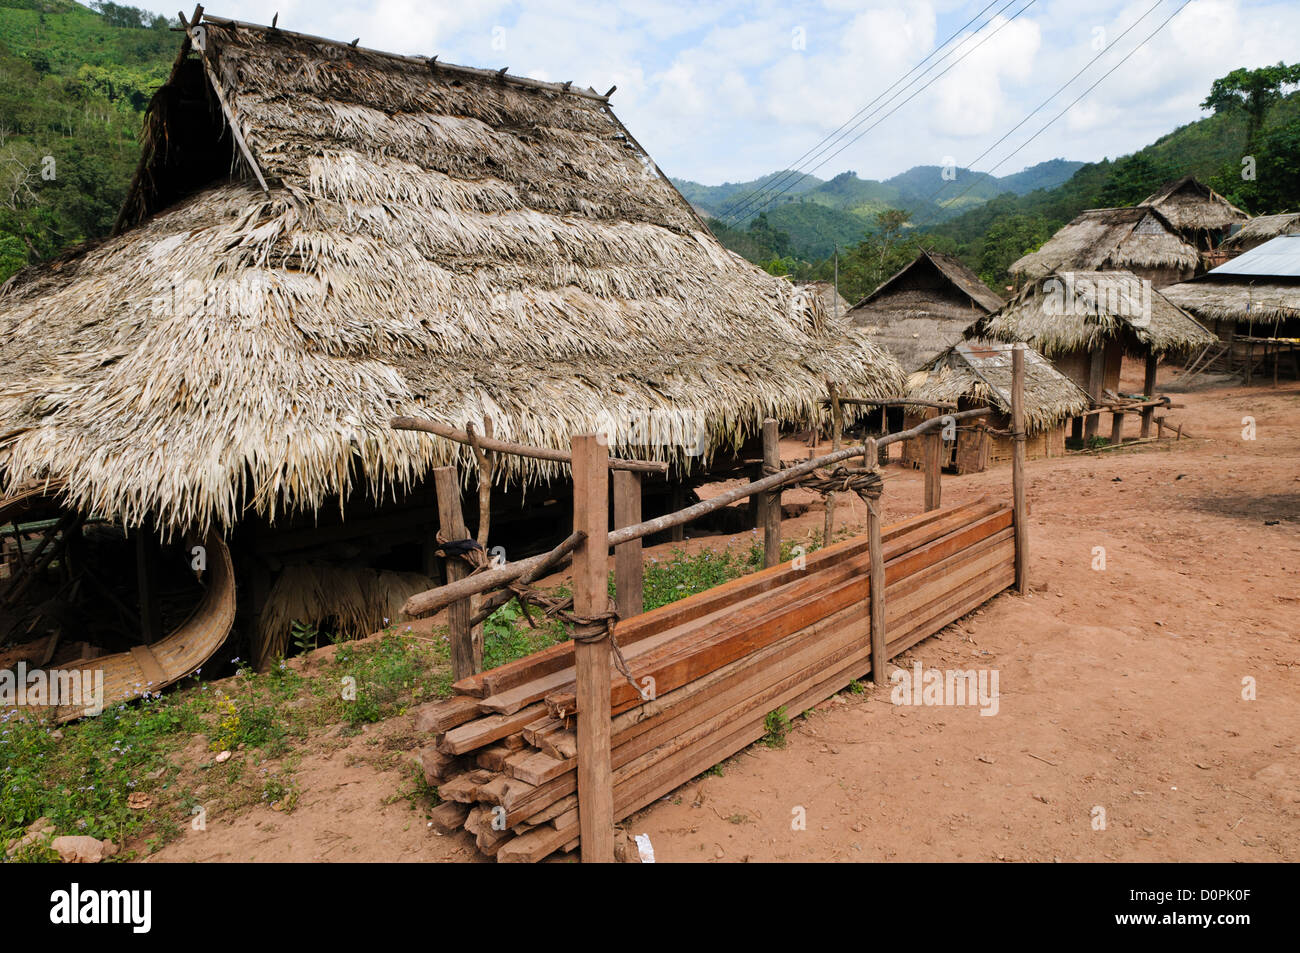 LUANG NAMTHA, Laos - The thatched roof of a building in Lakkhamma Village in Luang Namtha province in northern Laos. Lakkhamma Village was established as a joint project between the Lao government and the European Commission. Stock Photo